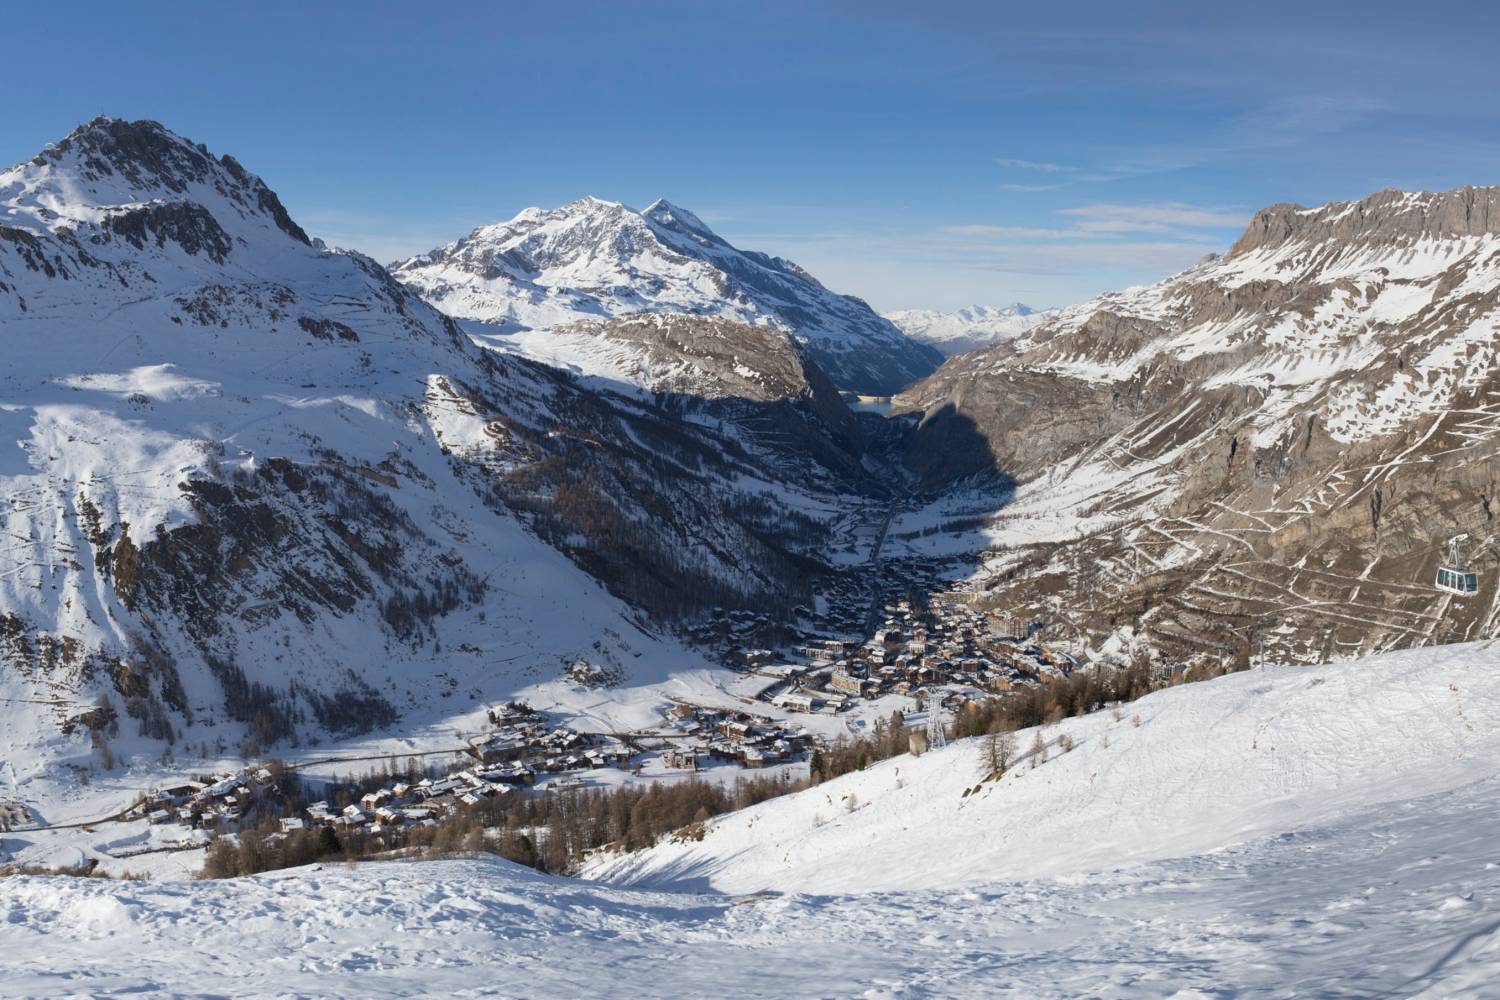 Enjoy a private chef after an amazing ski day in Val d'Isère - Take a Chef